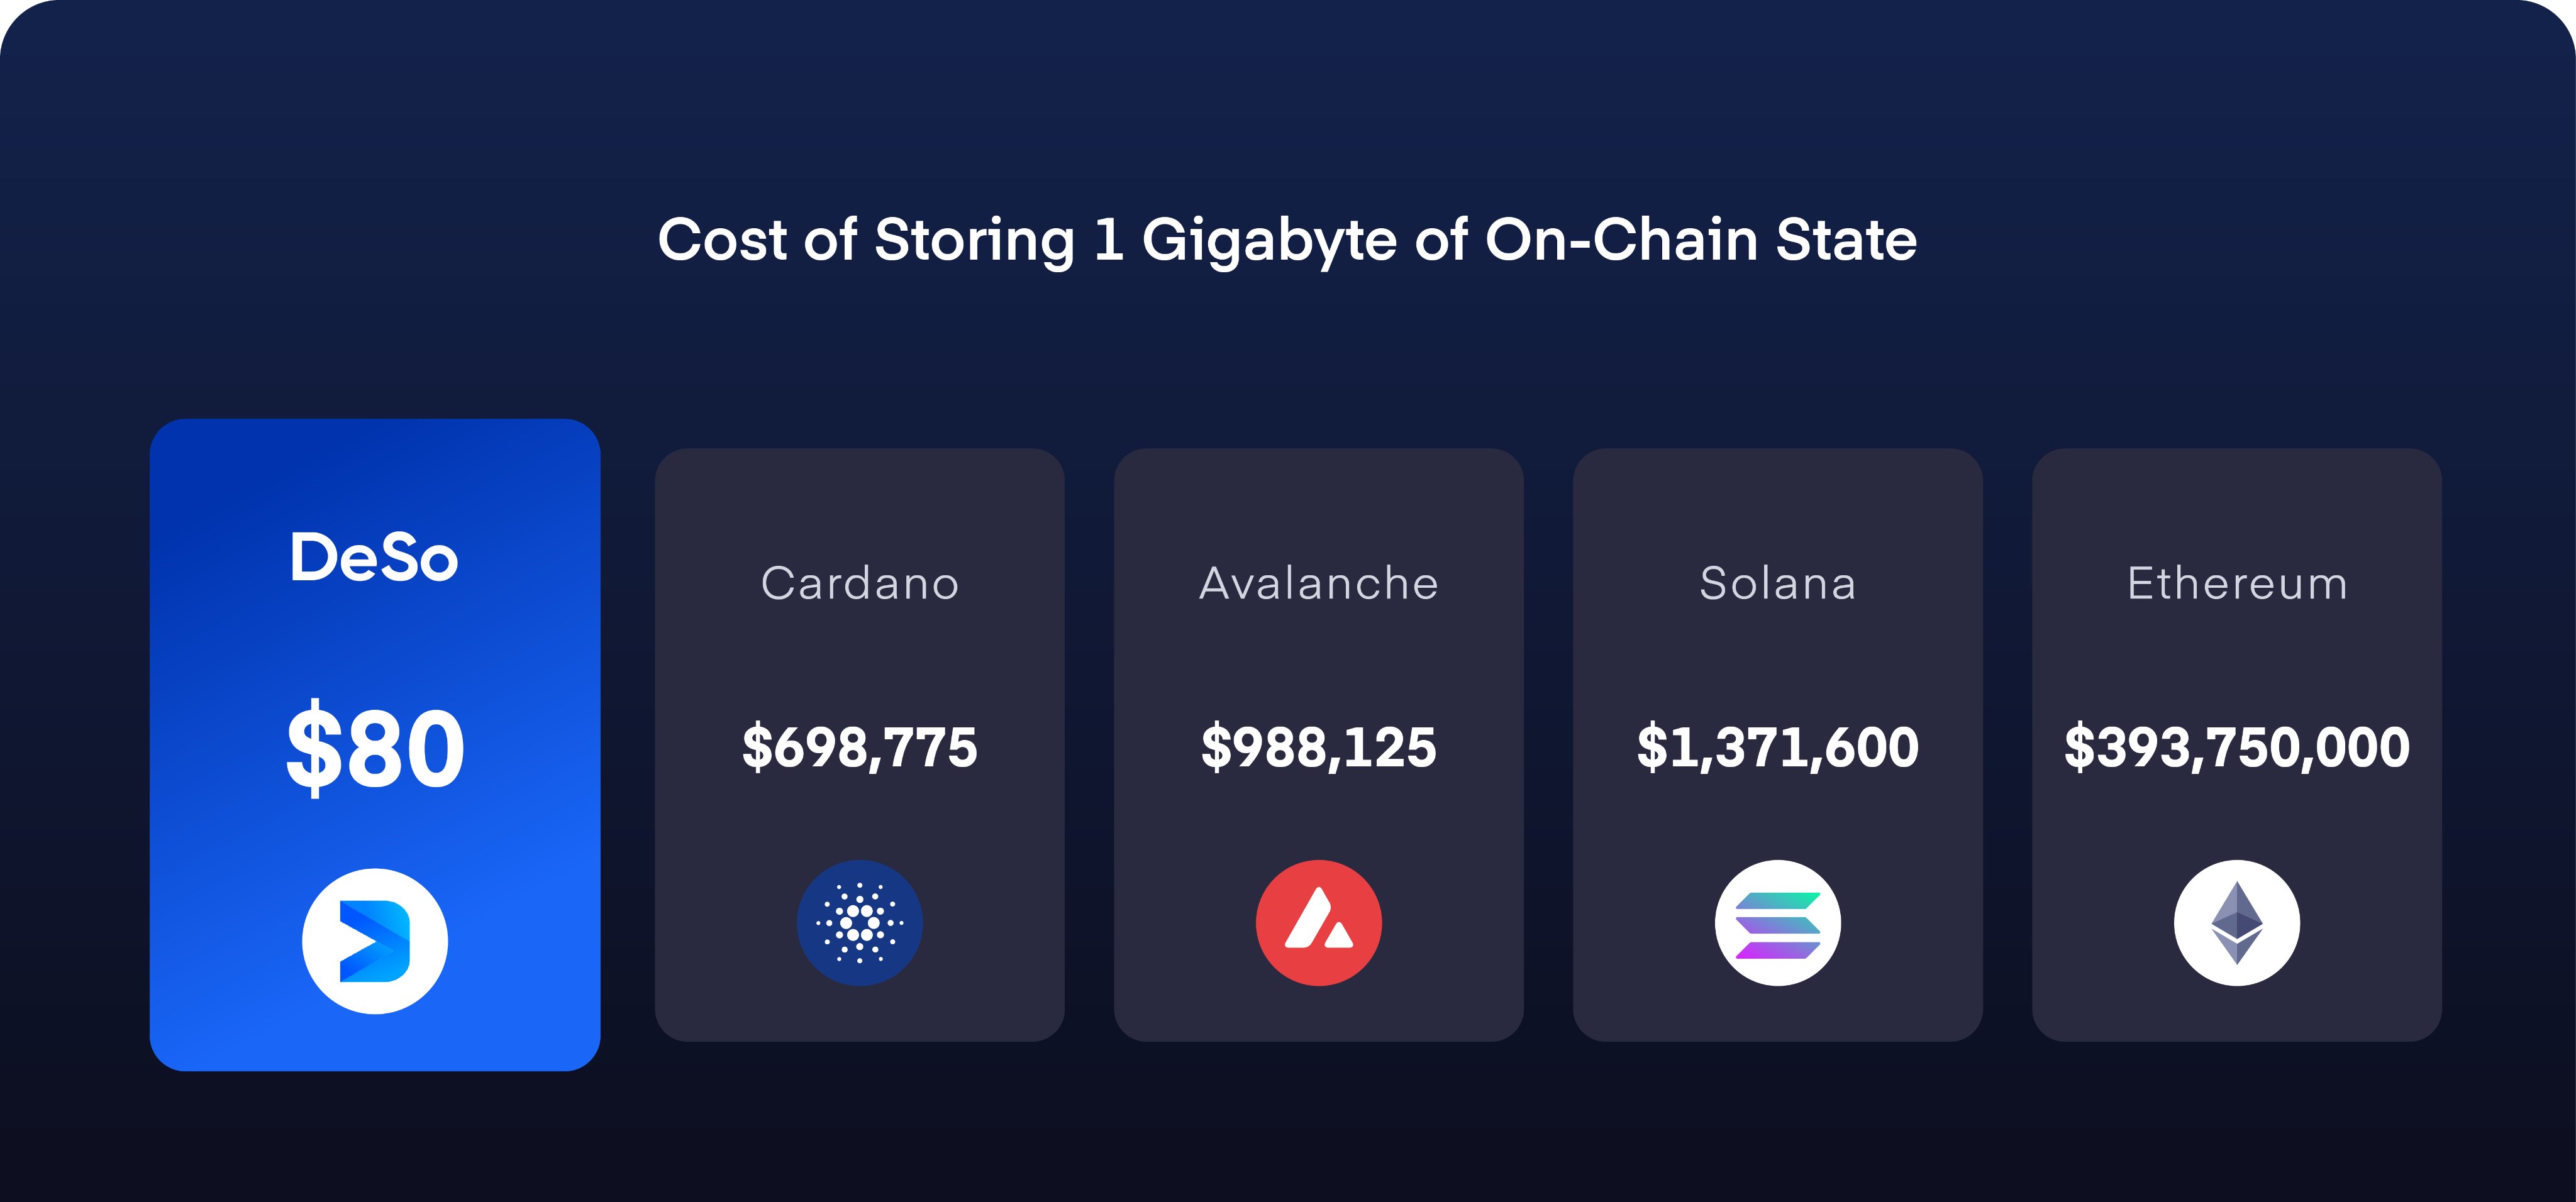 DeSo on Twitter: "No general-purpose blockchain is designed to handle infinite-state applications, it costs too much. But with DeSo, we can. Cost of storing 1 gigabyte on-chain: https://t.co/OQUjMCGwYD" / Twitter